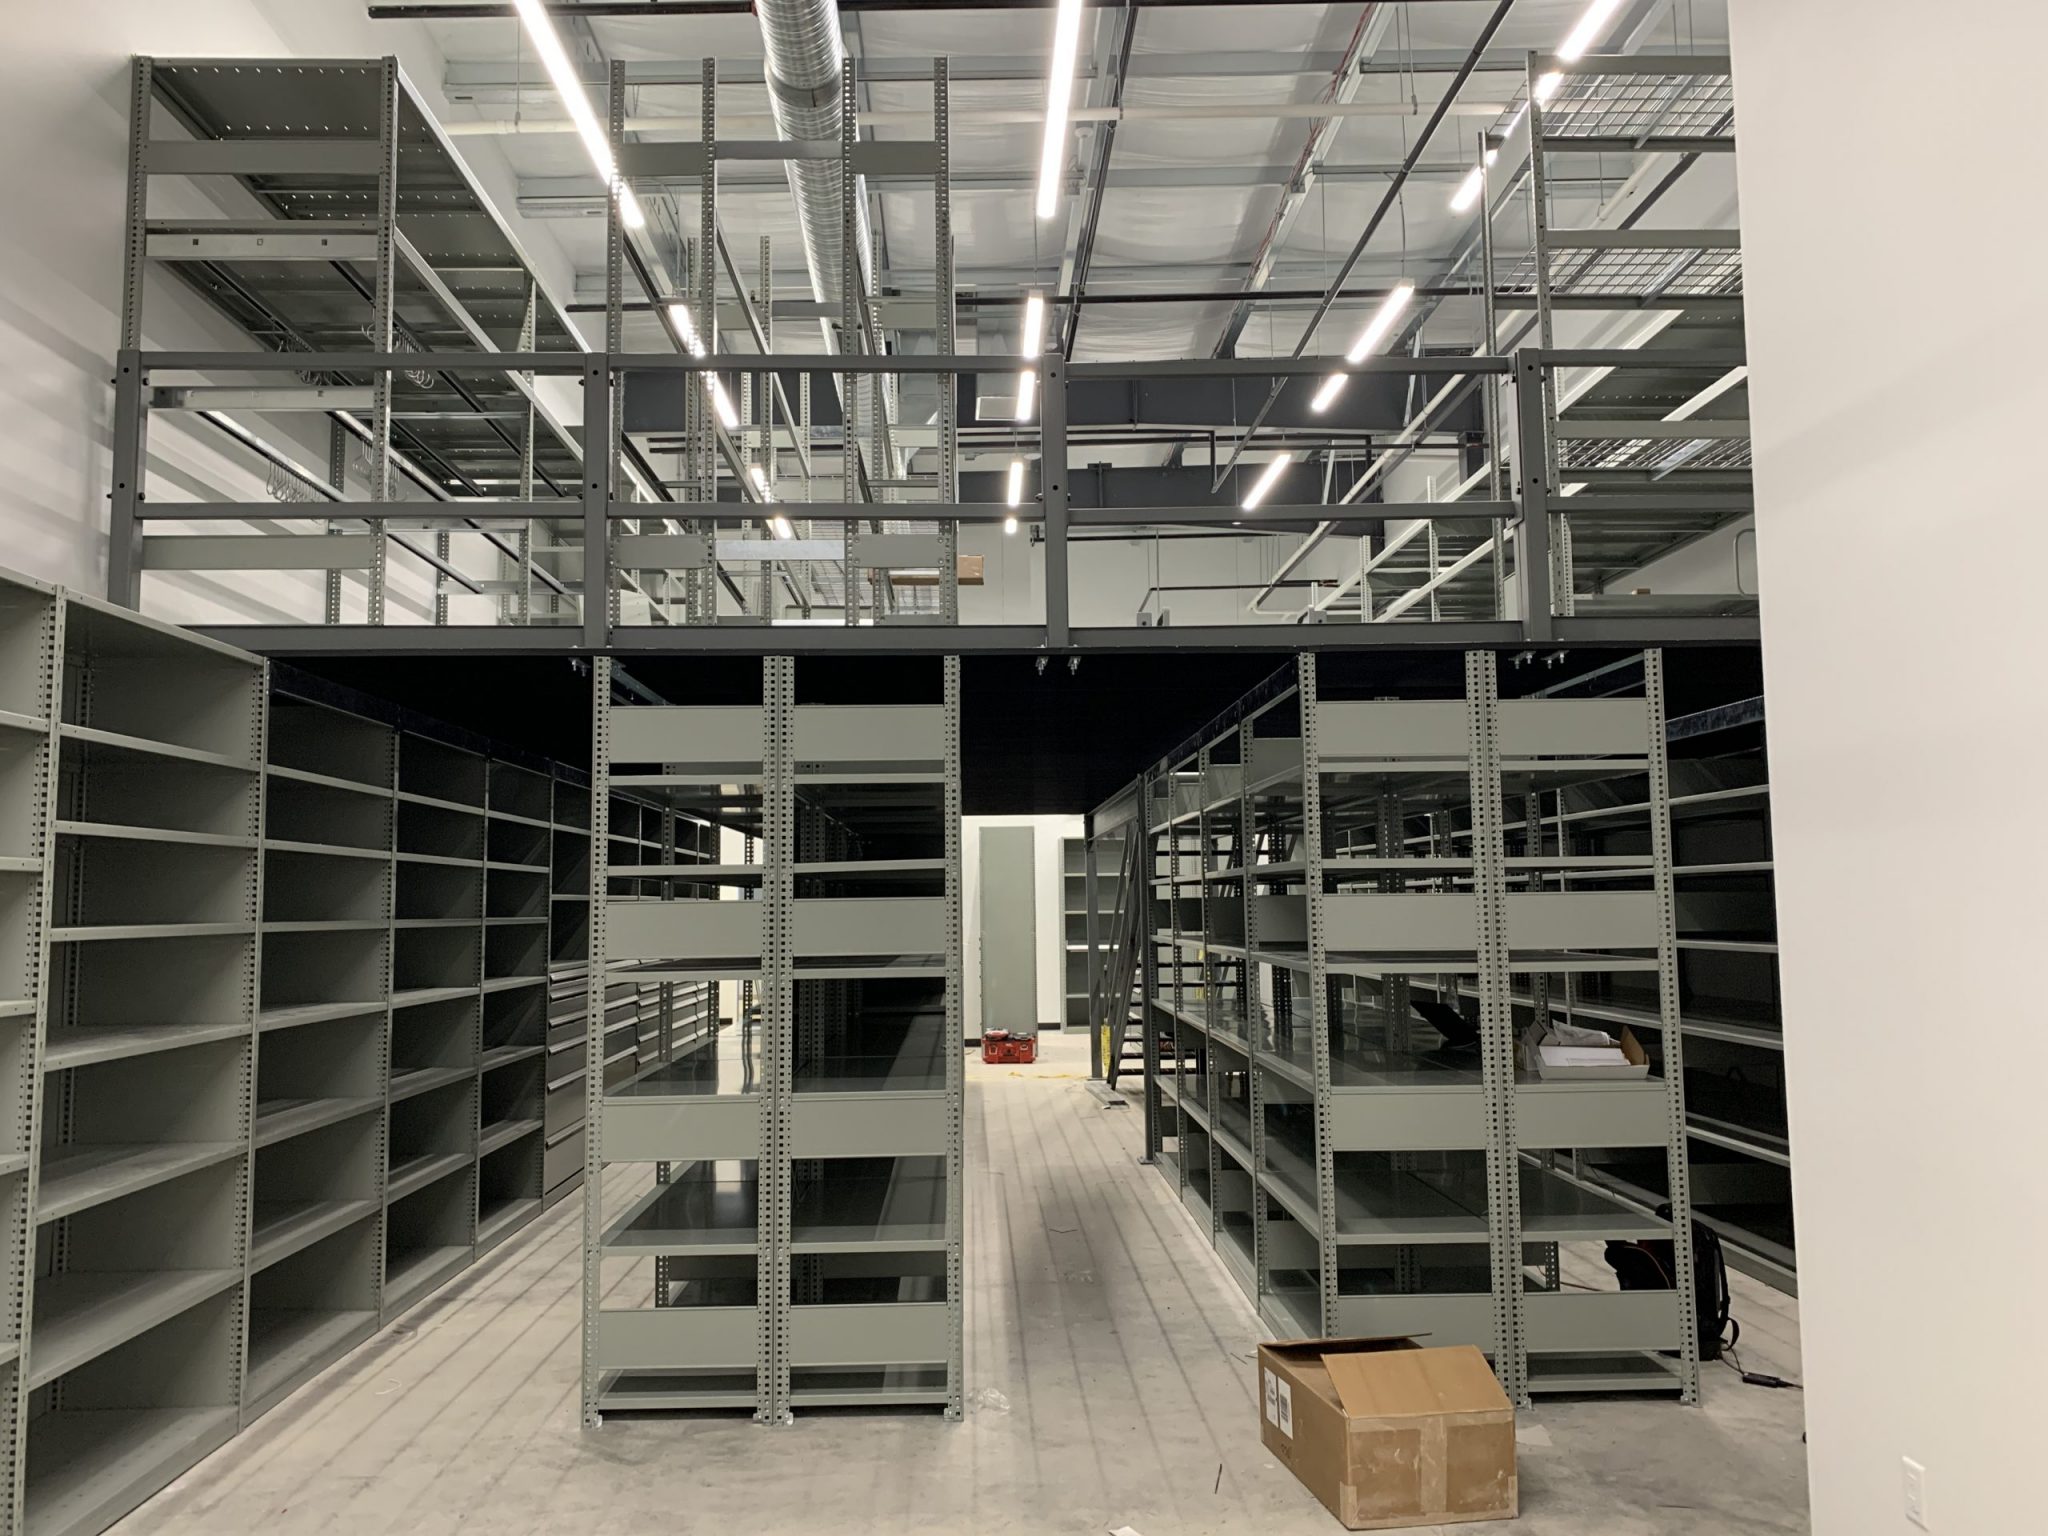 Parts Room with Shelving Above and Below Mezzanine